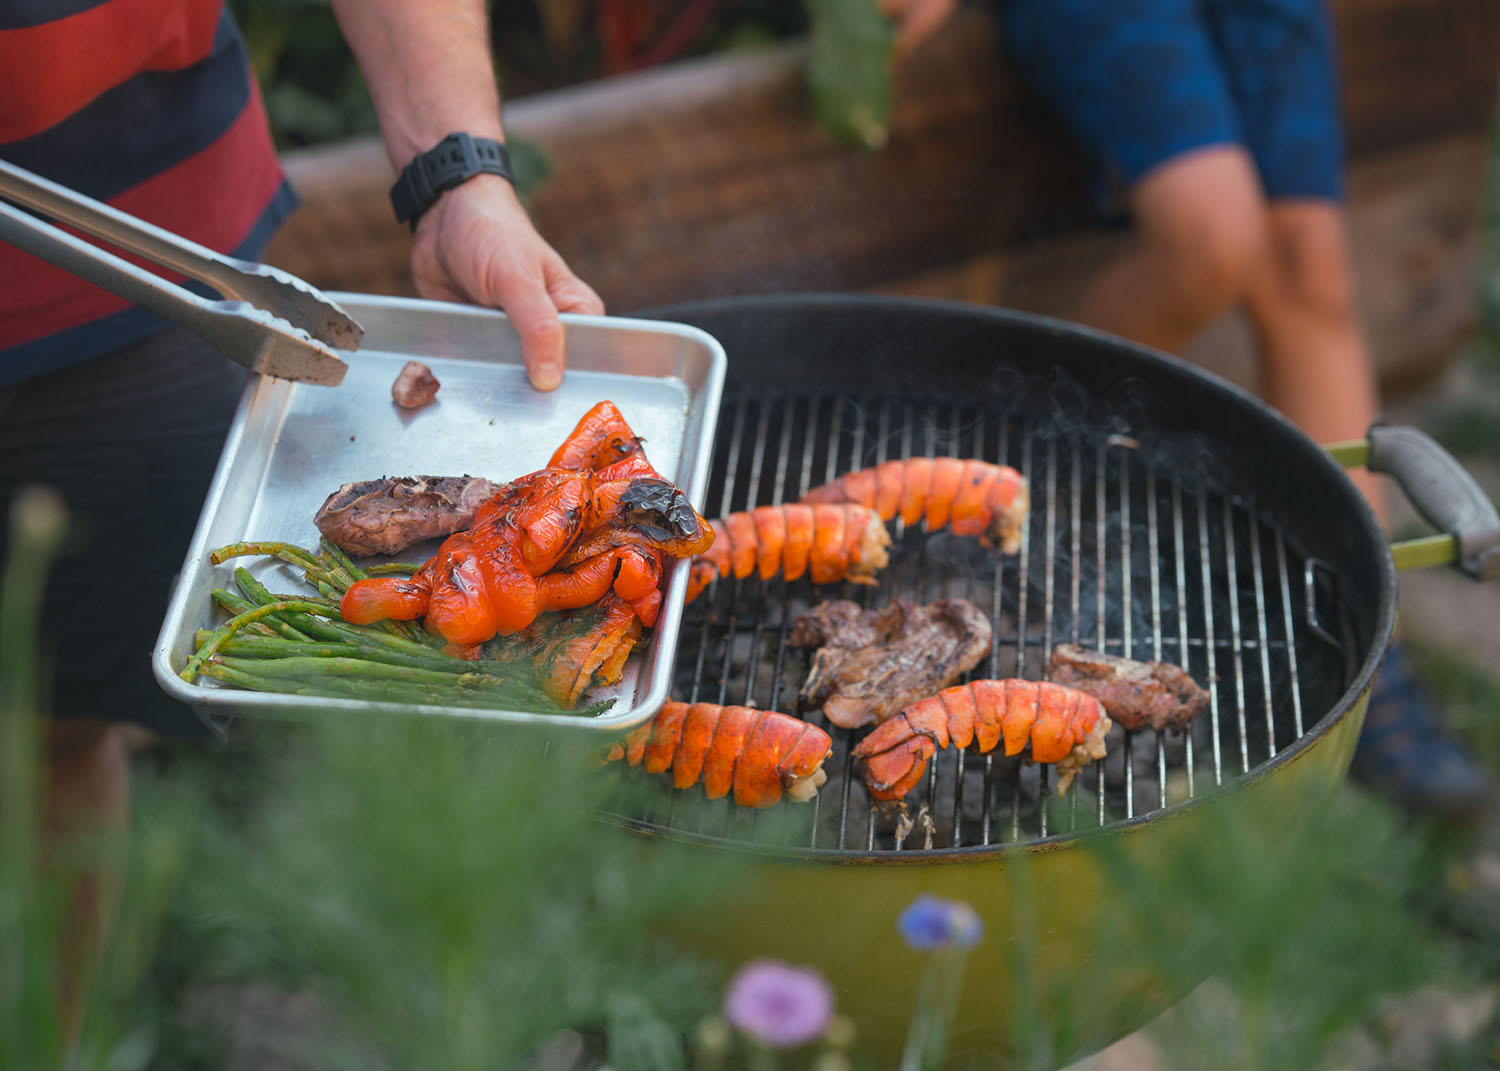 Laid-back summer day calls for a cookout with family and dog Backyard blooming with flowers.  Grilled lobster, grilled hamburger and veggies. Dog and child playing together. Laughing family, hugs exchanged, cheers to beer all add to a warm and good family dinner. Editor Adrian Walker